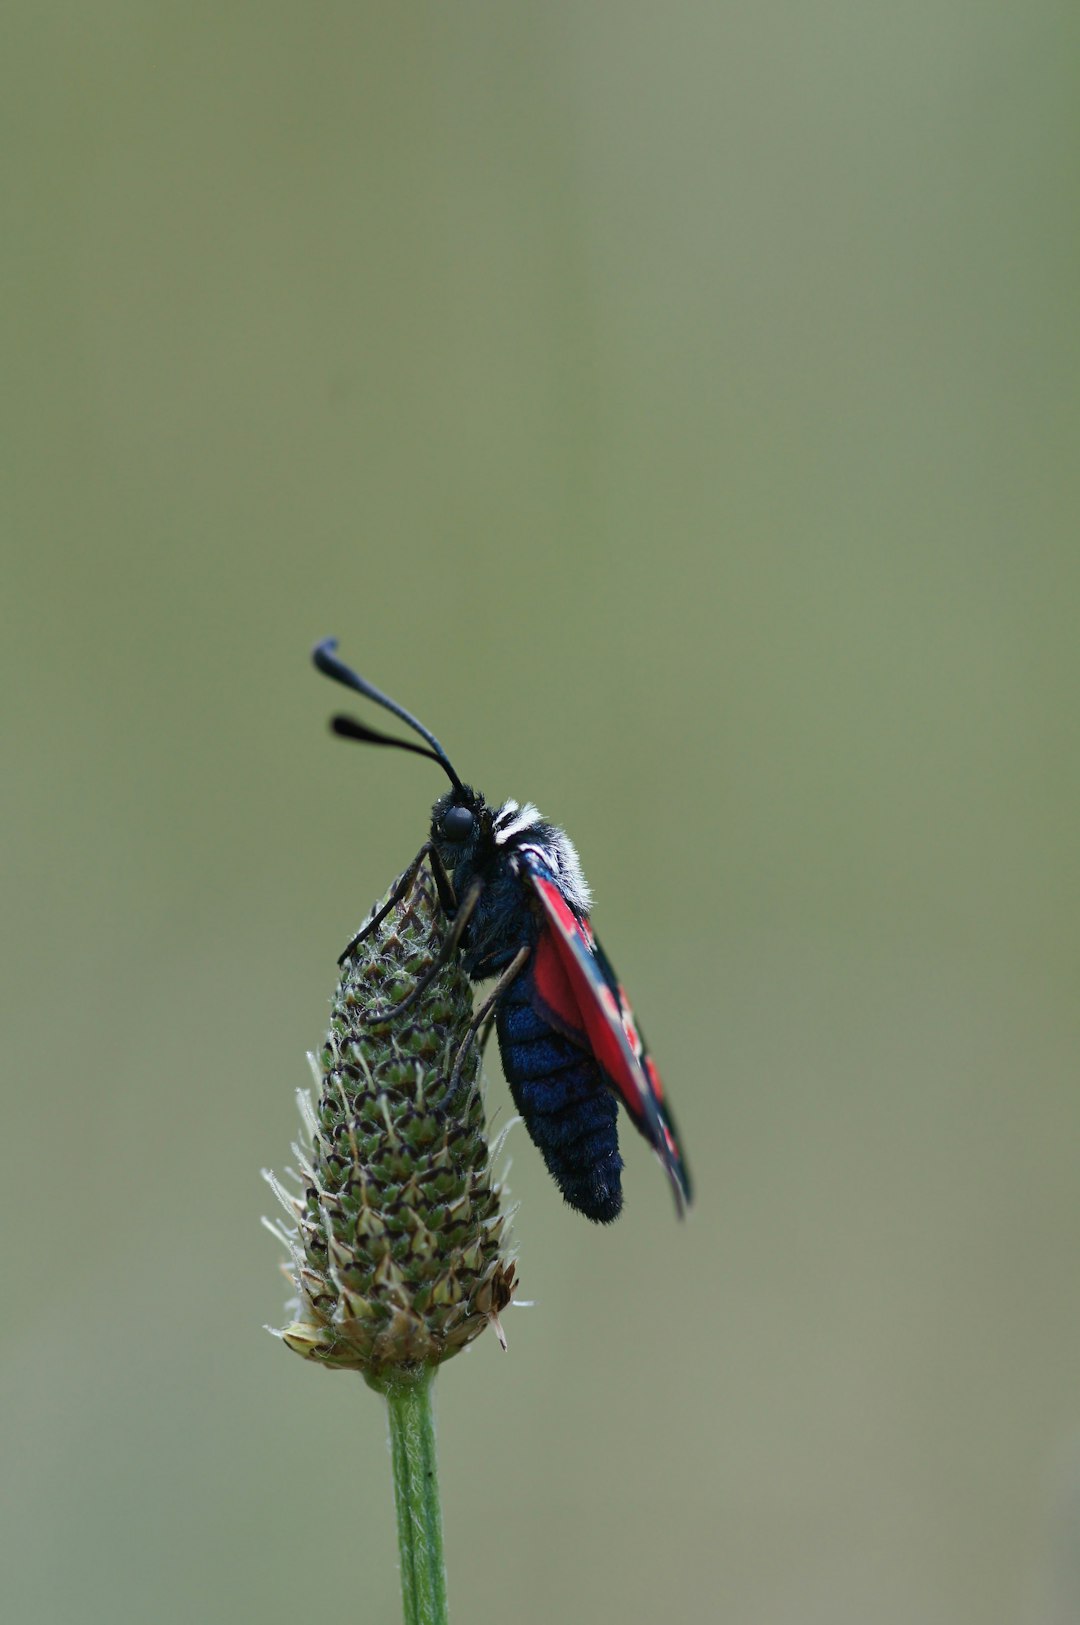 blue and red butterfly on green cactus